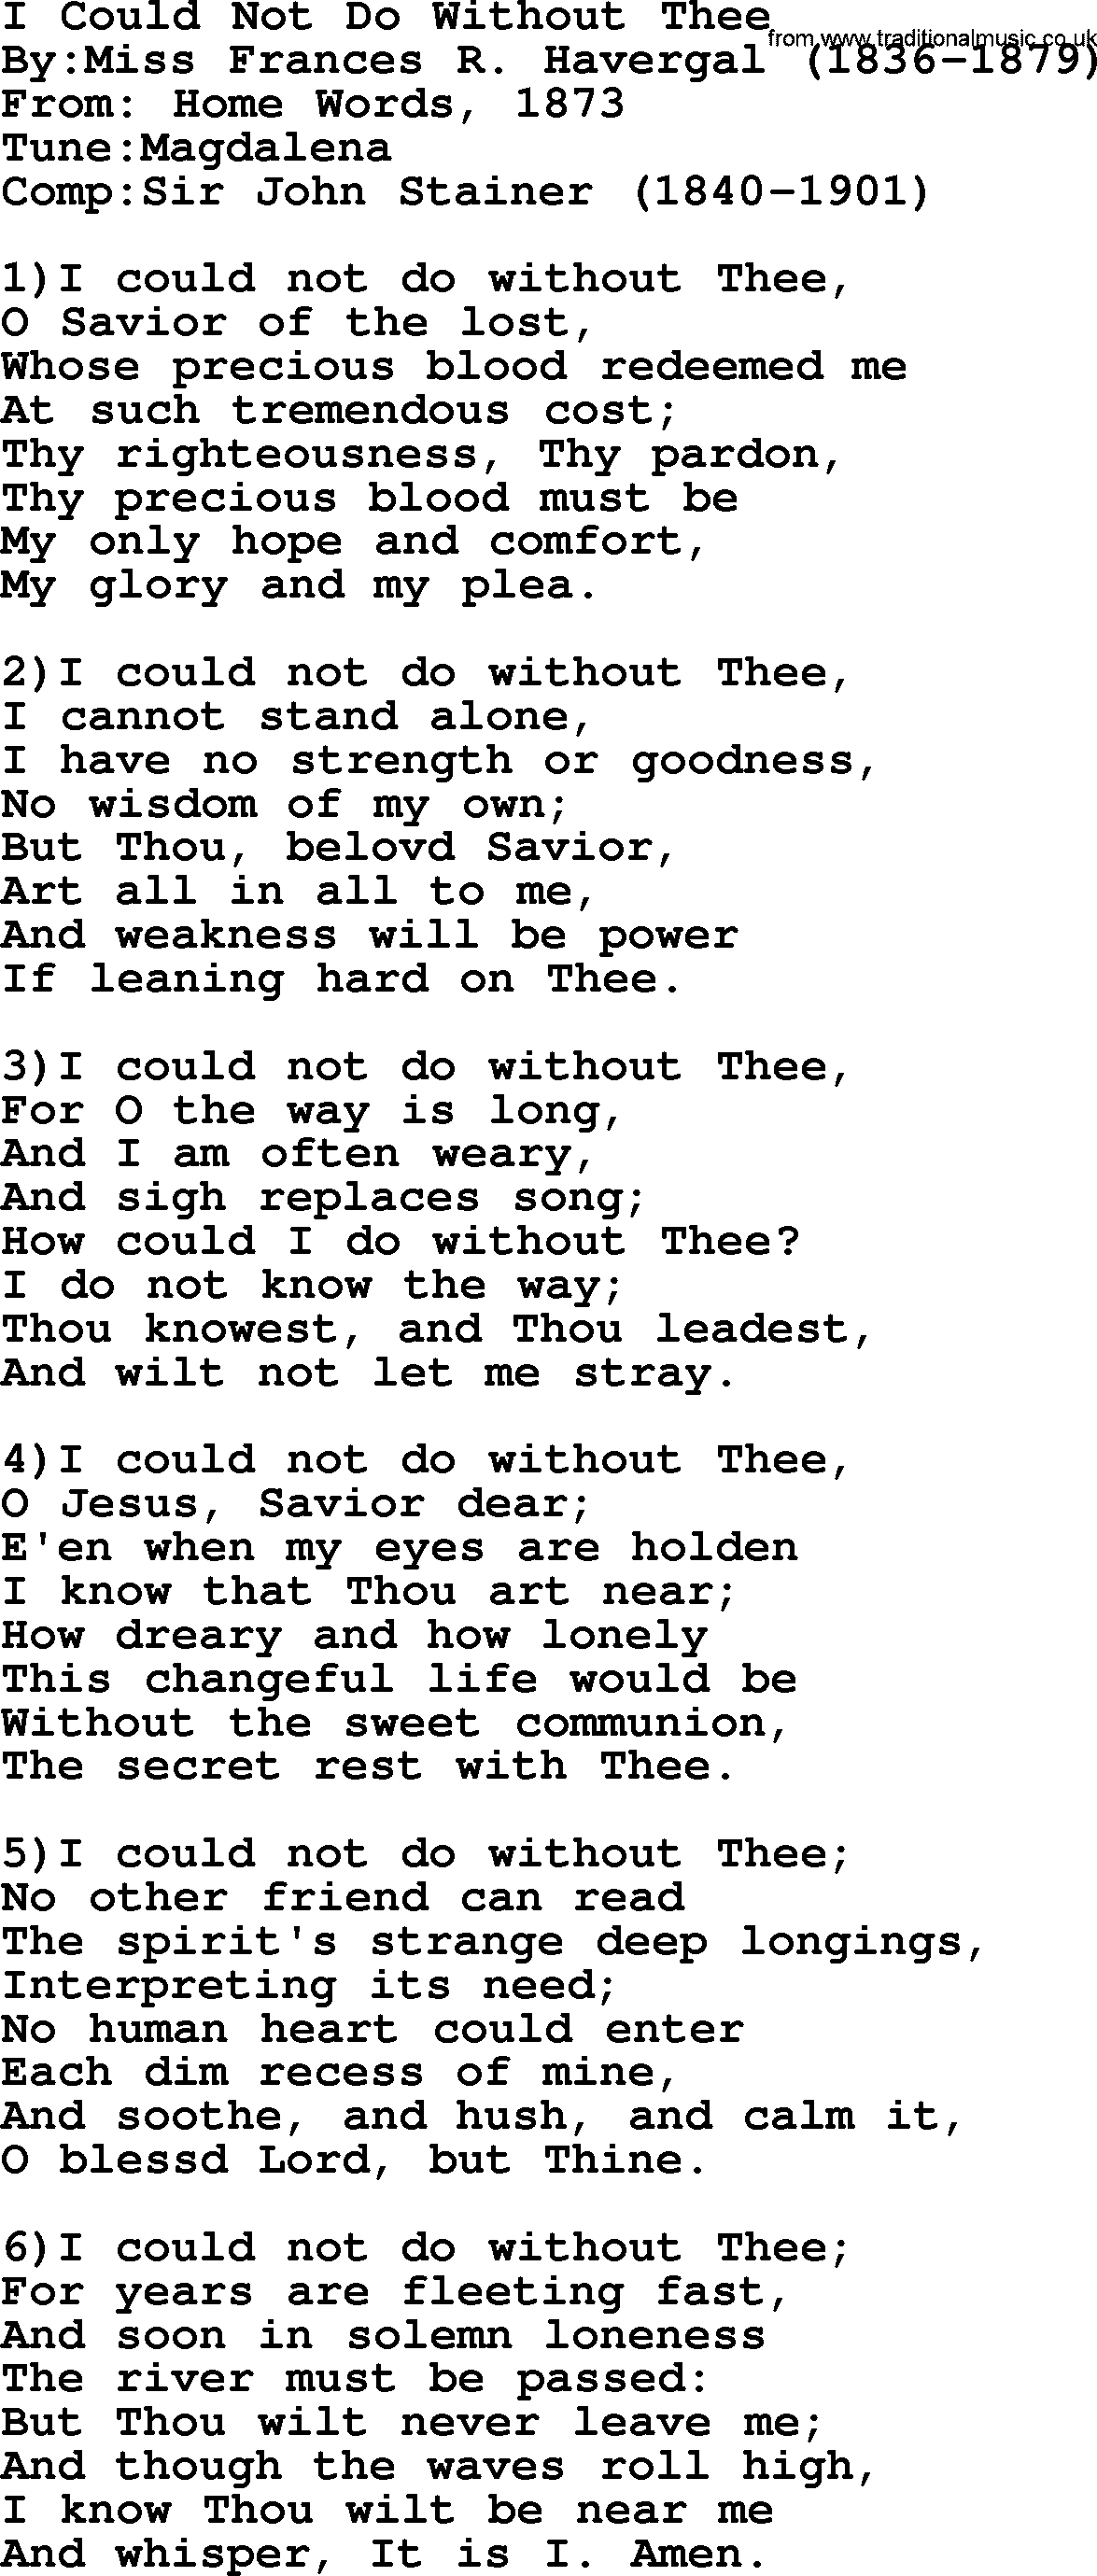 Methodist Hymn: I Could Not Do Without Thee, lyrics